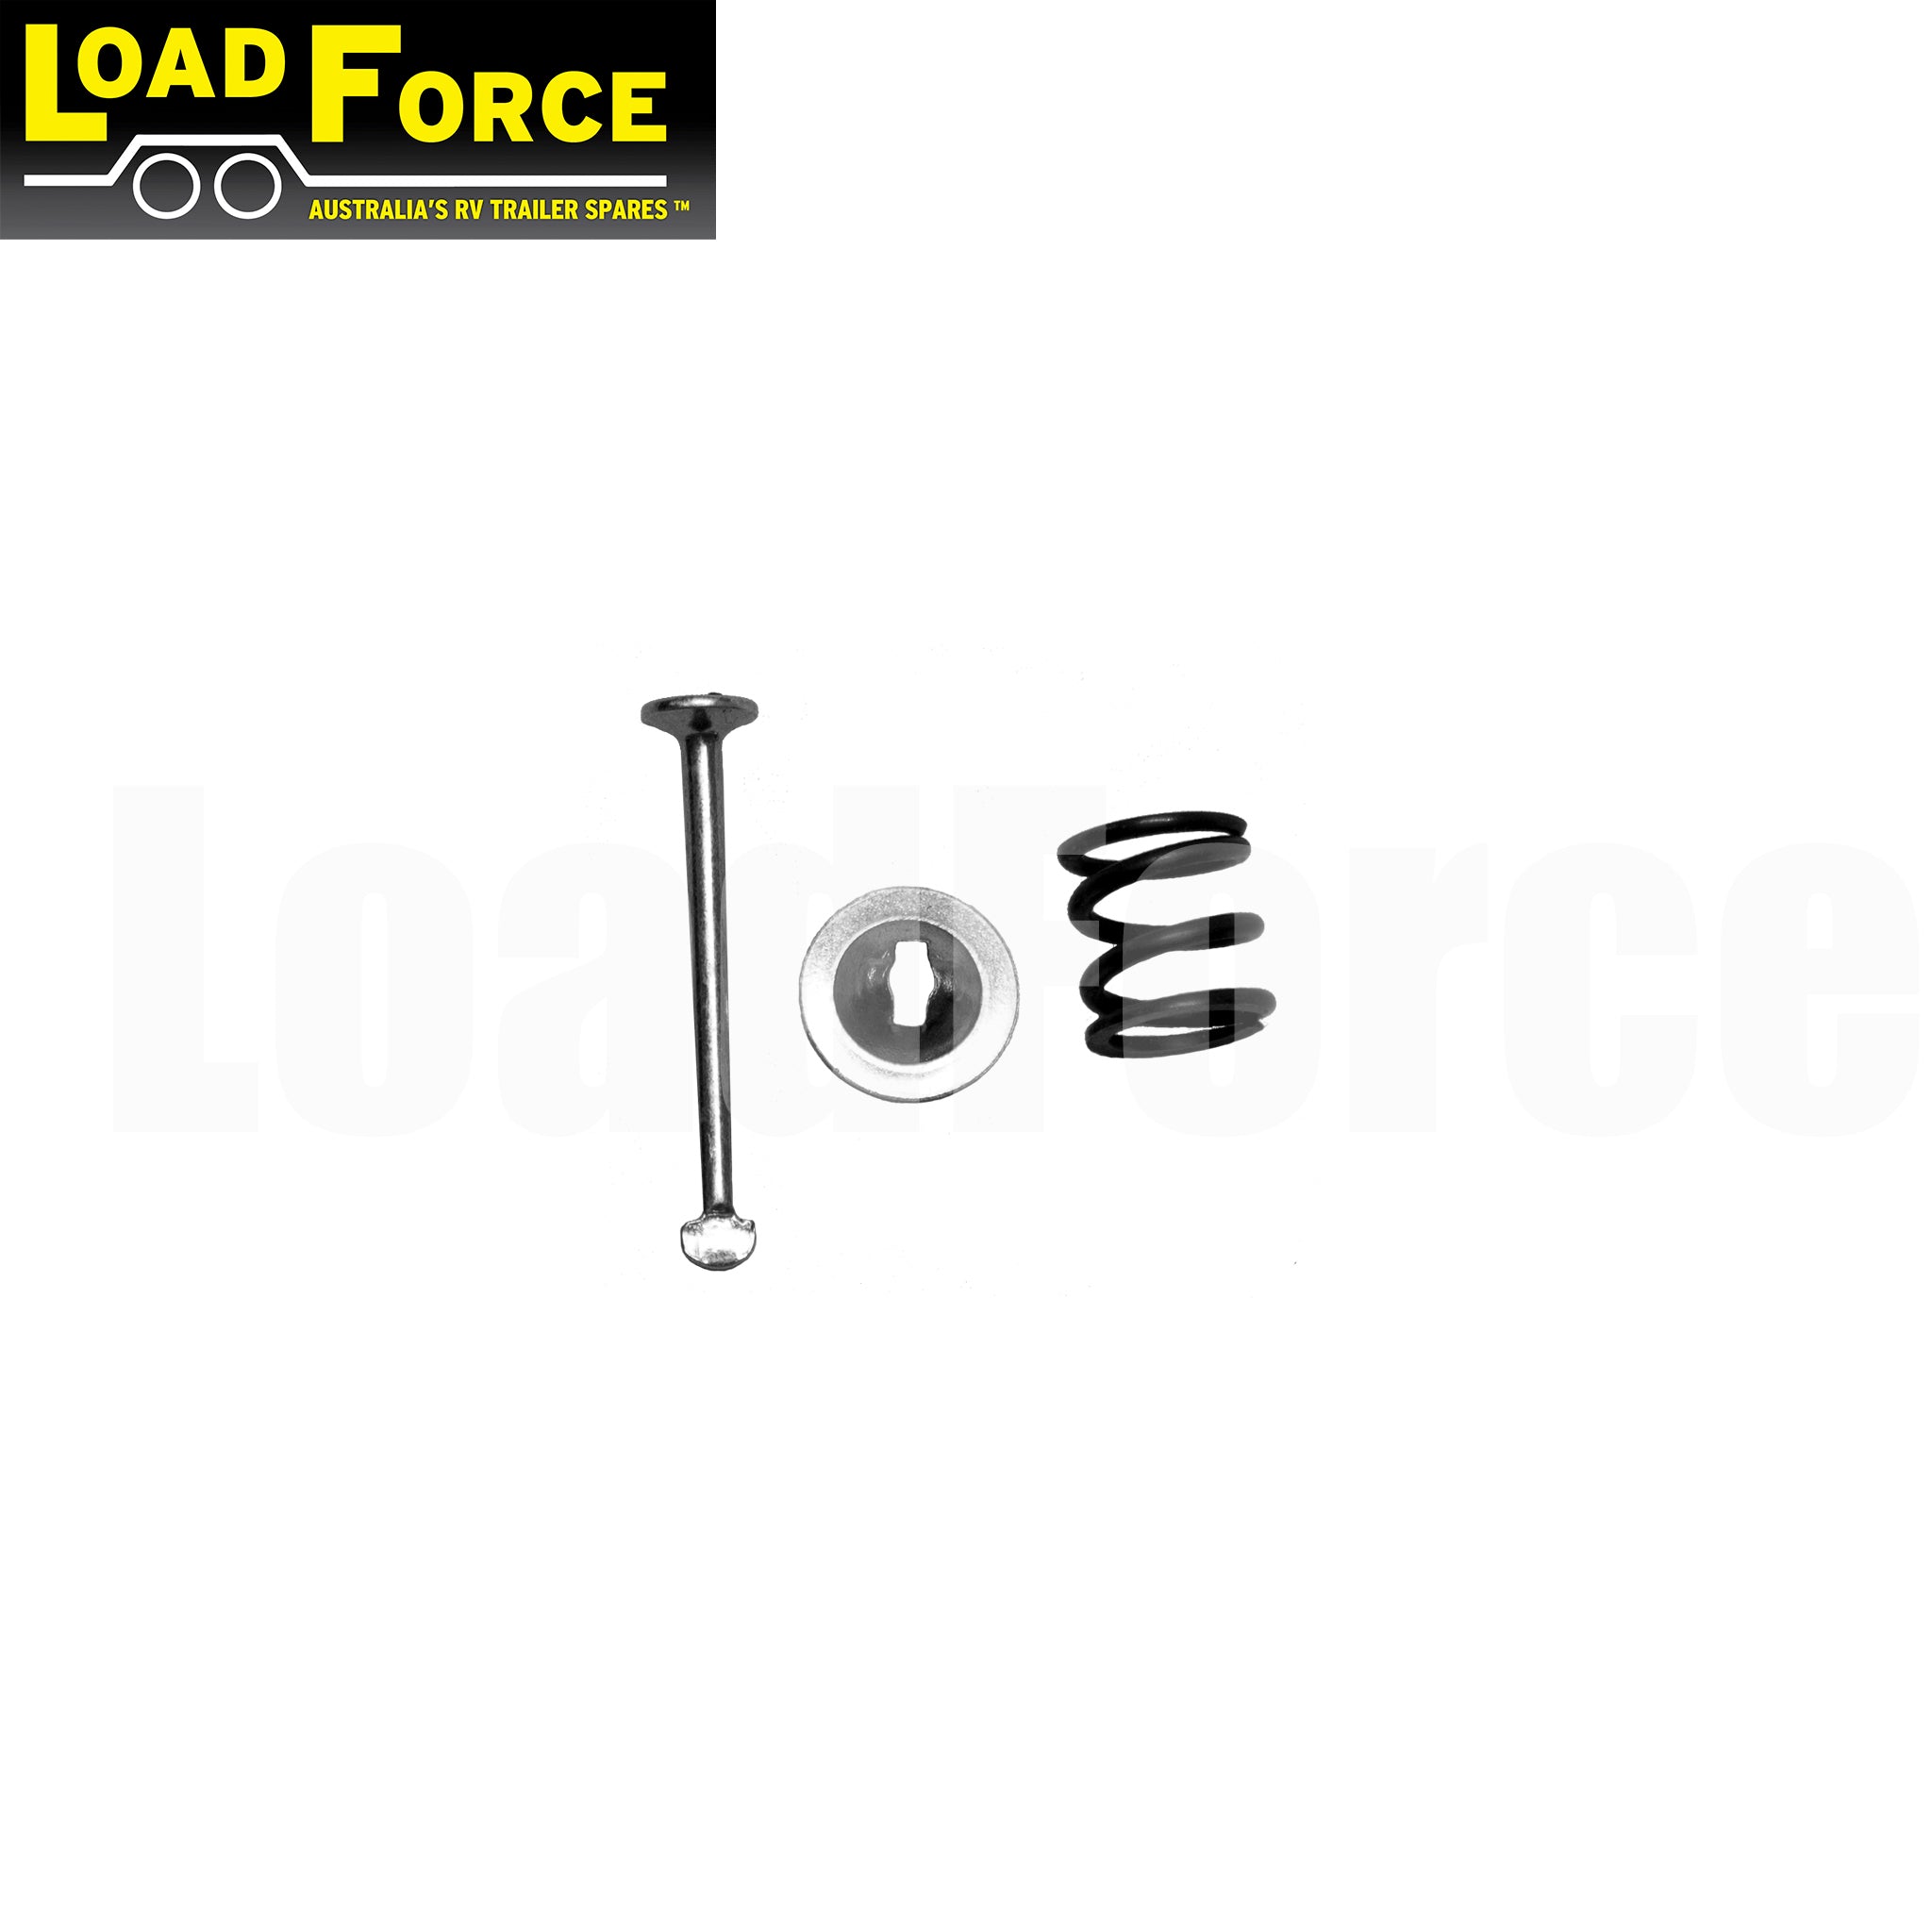 Brake shoe retaining pin, spring and cup for 9 inch mechanical & hydraulic